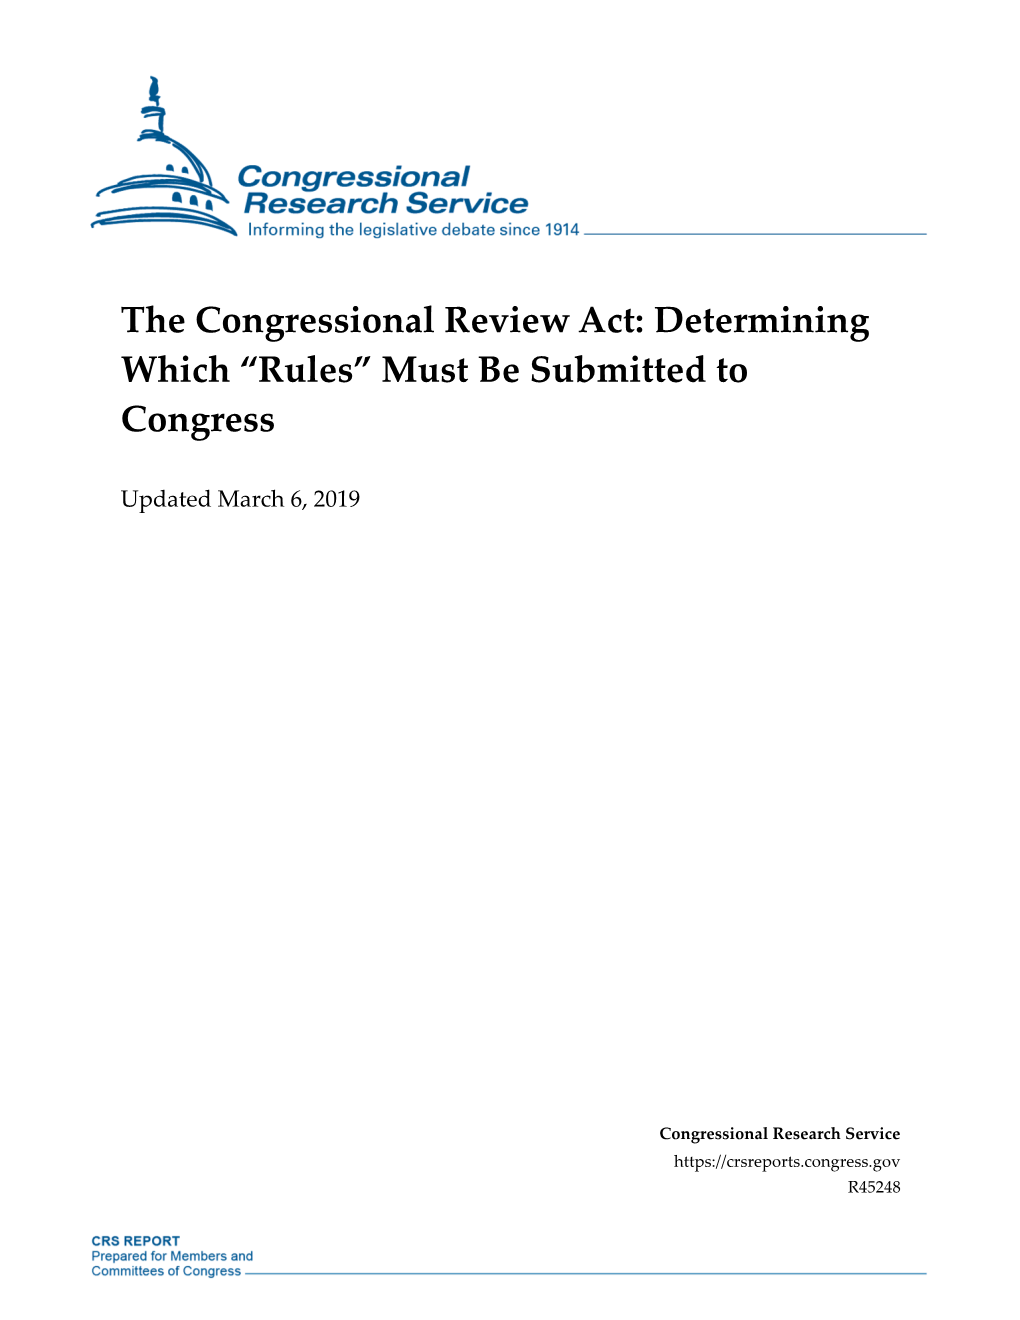 The Congressional Review Act: Determining Which “Rules” Must Be Submitted to Congress